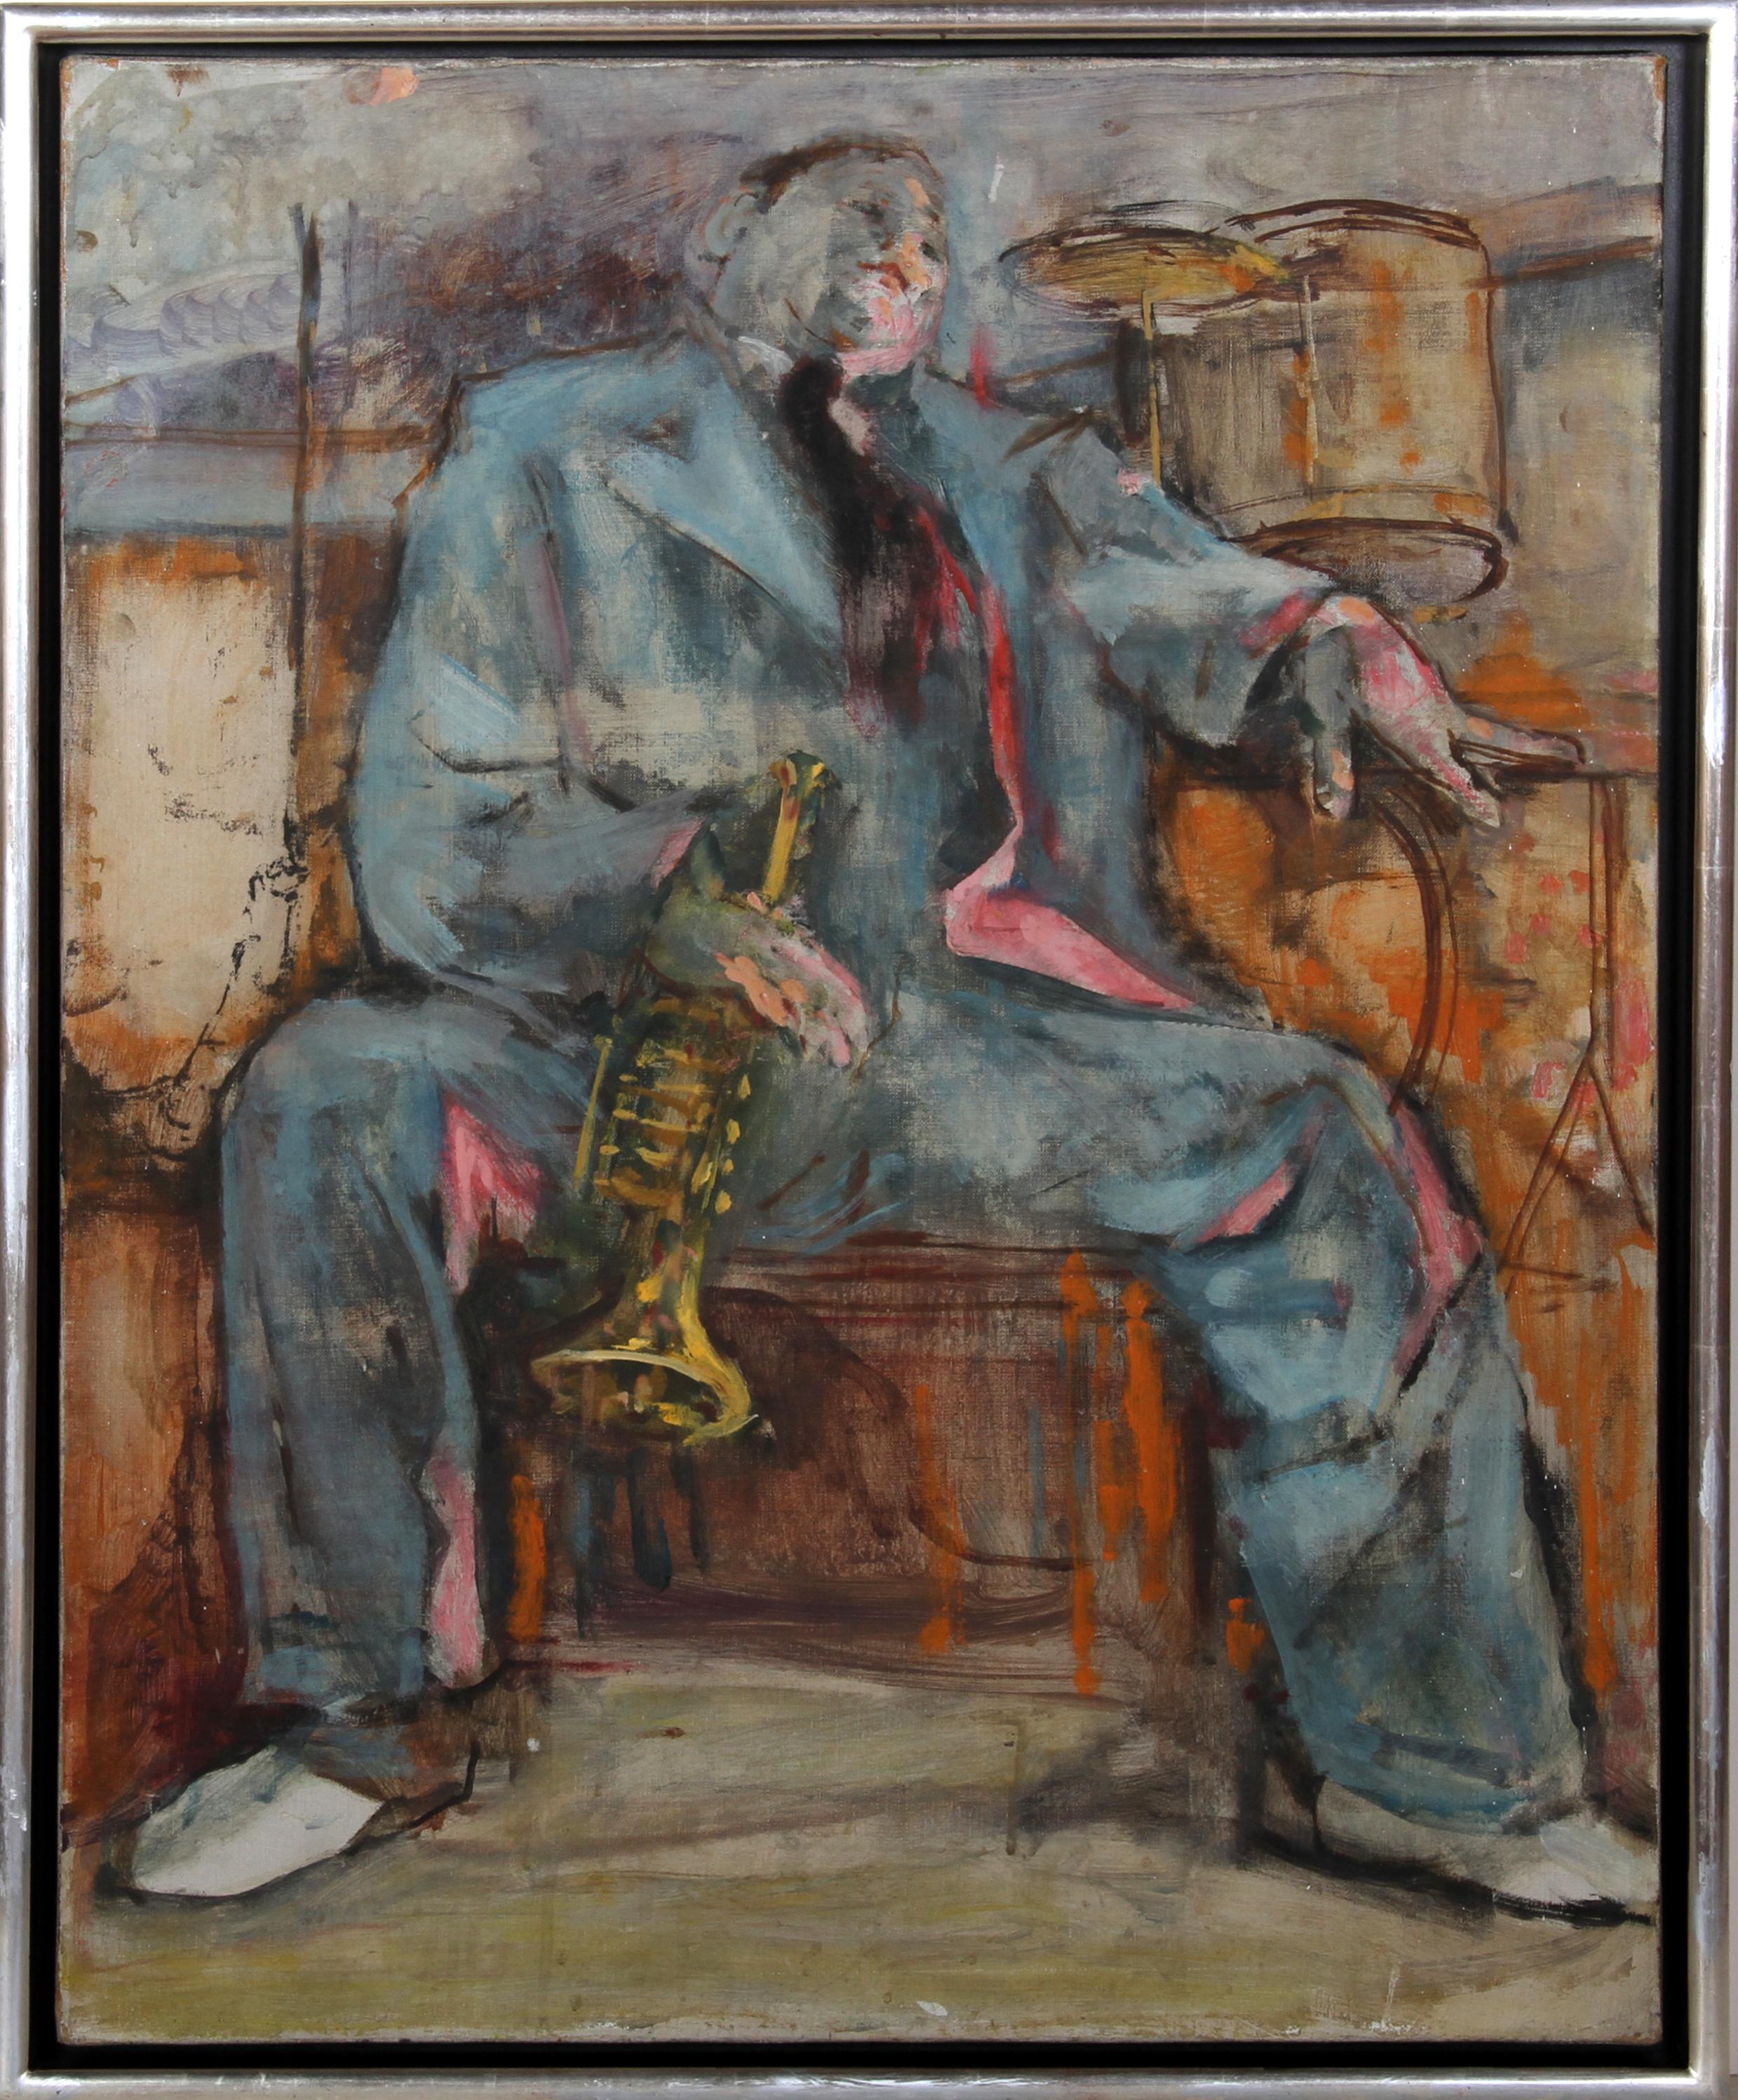 Trompettiste
Marshall Goodman, américain (1916-2003)
Date : vers 1960
Huile sur toile
Taille : 30 in. x 24 in. (76,2 cm x 60,96 cm)
Taille du cadre : 32 x 26 pouces